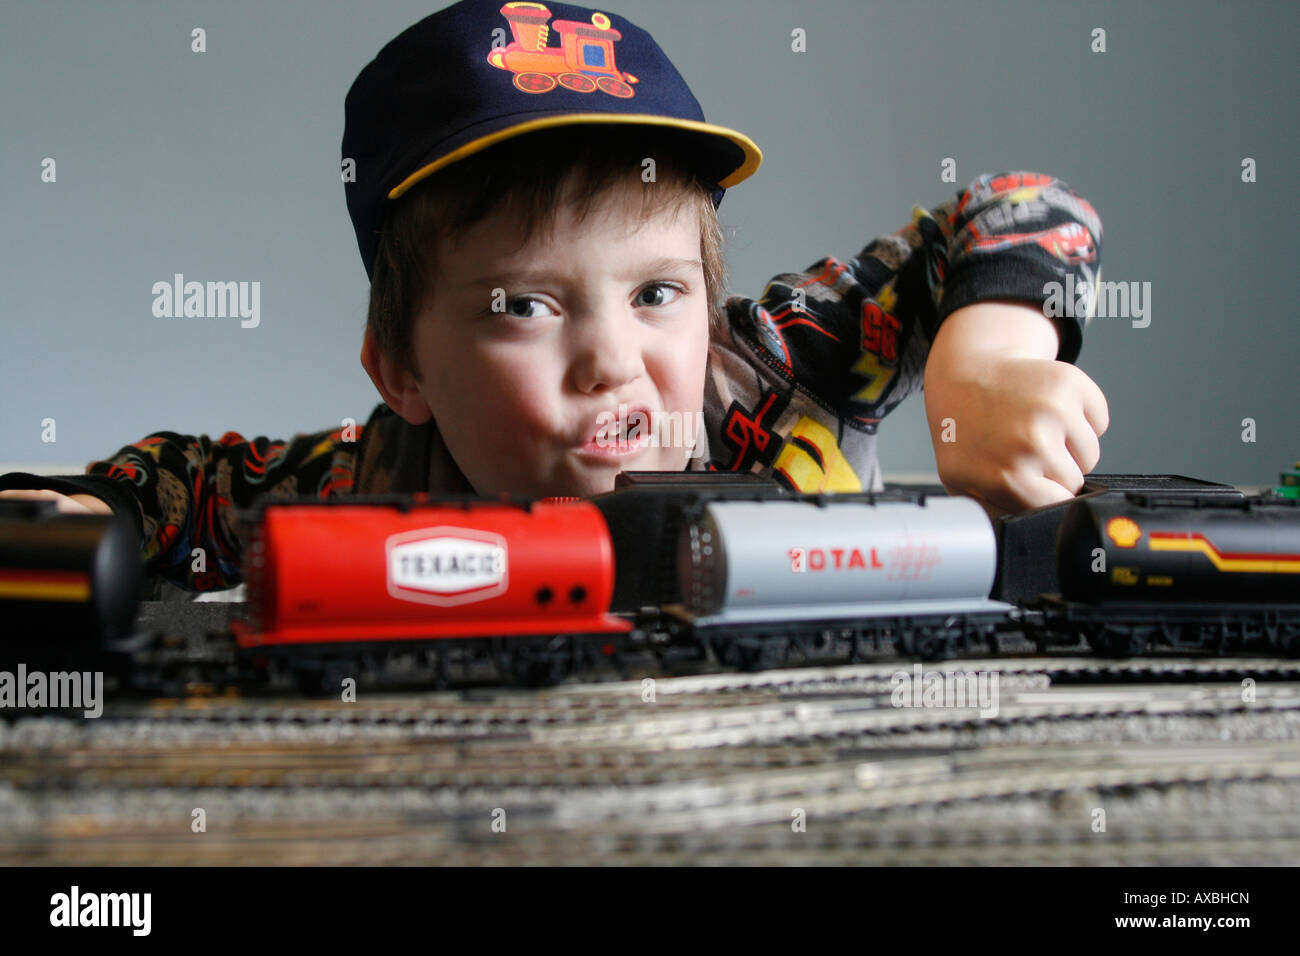 Lewis aged six and his Hornby electric train set. 00 H0 rolling stock track, Model train set with track, hat and whistle form part of the game. Stock Photo